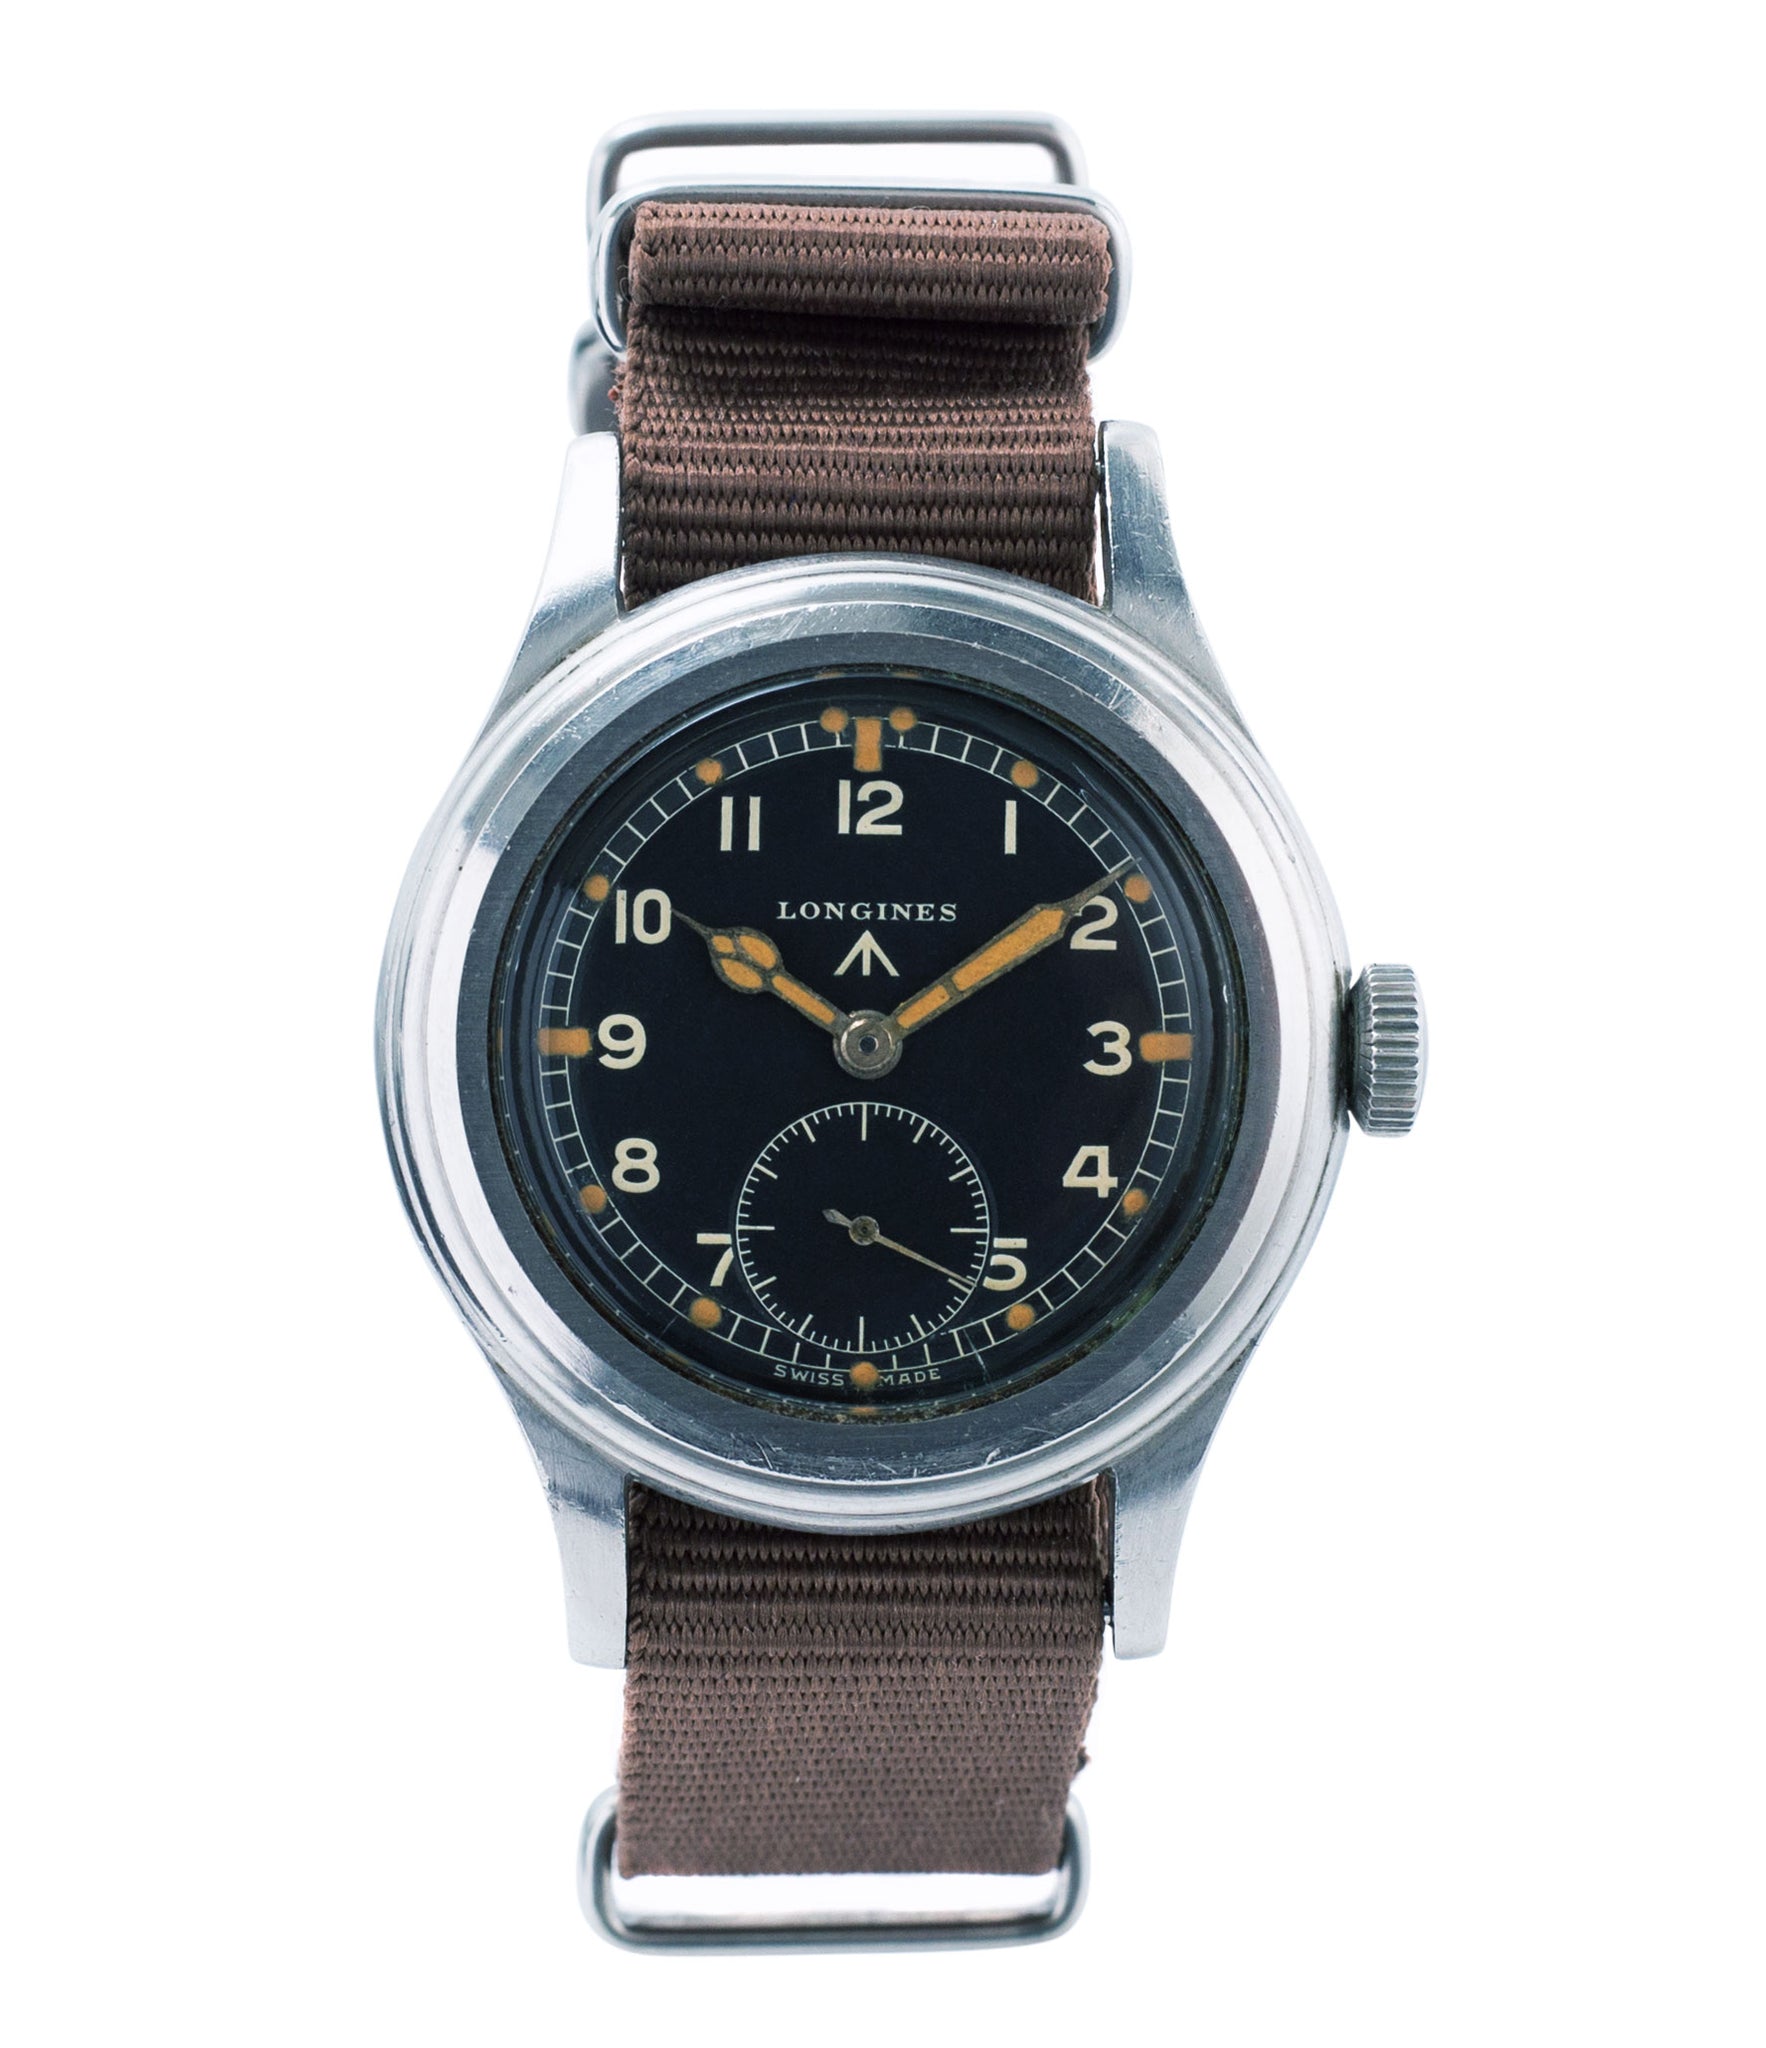 buy Longines W.W.W. Dirty Dozen British military MoD steel chronometer-graded watch for sale online at A Collected Man London vintage military watch specialist